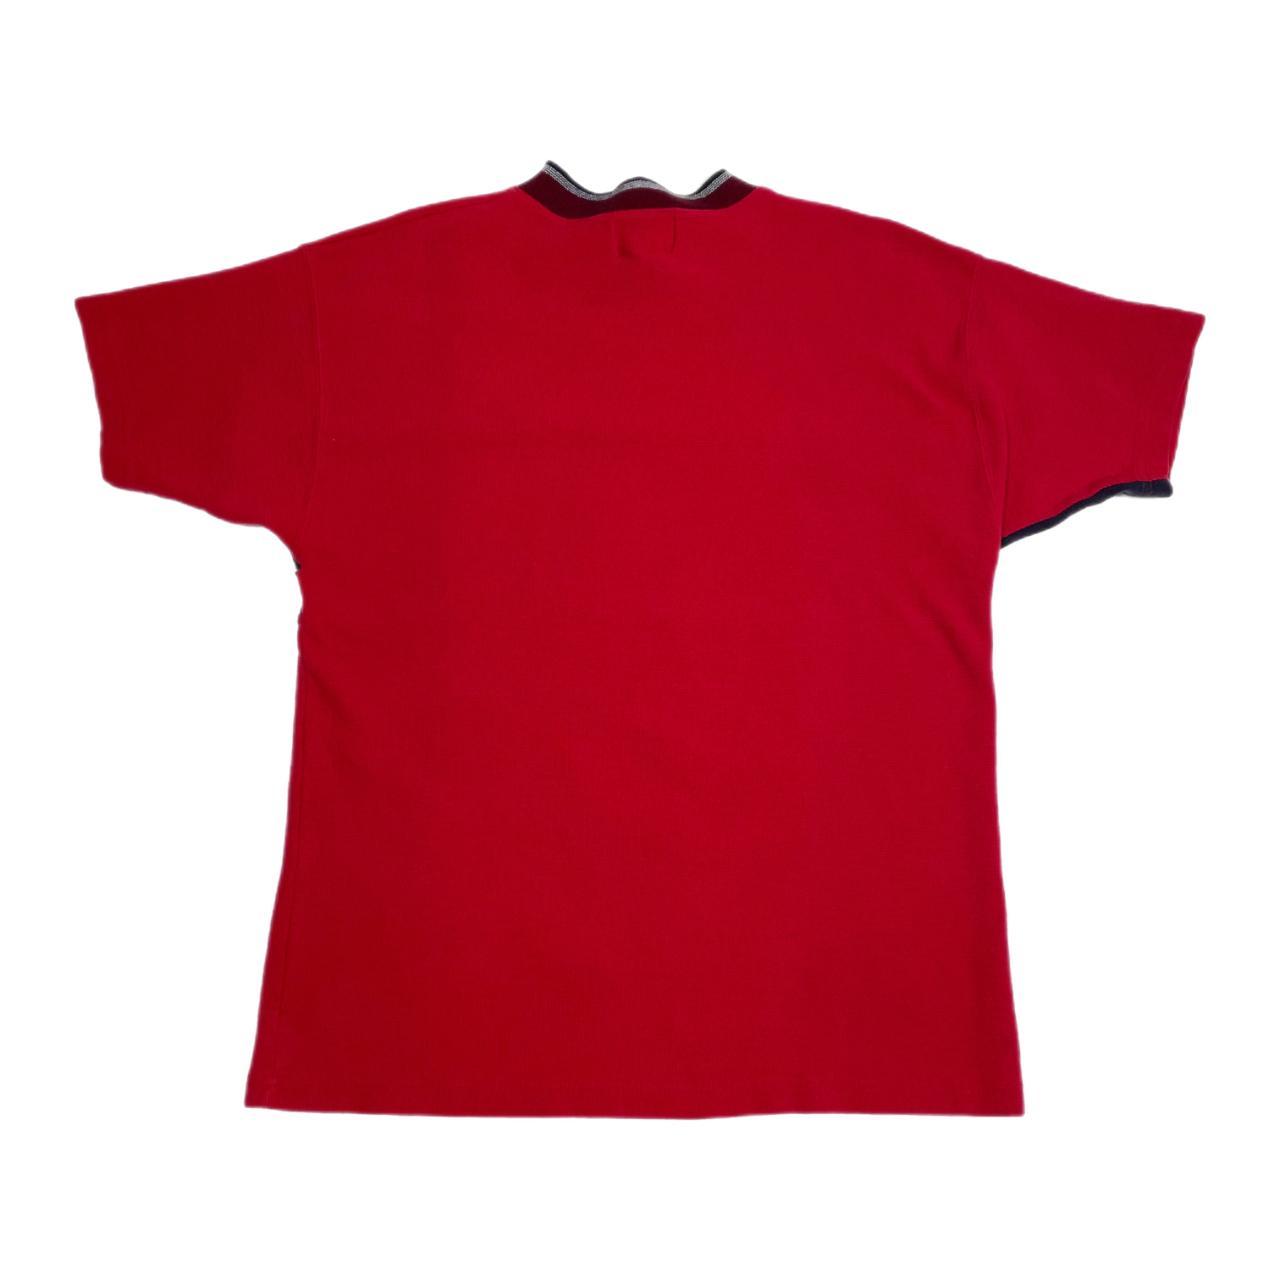 Ocean Pacific Men's Red and Navy T-shirt (2)